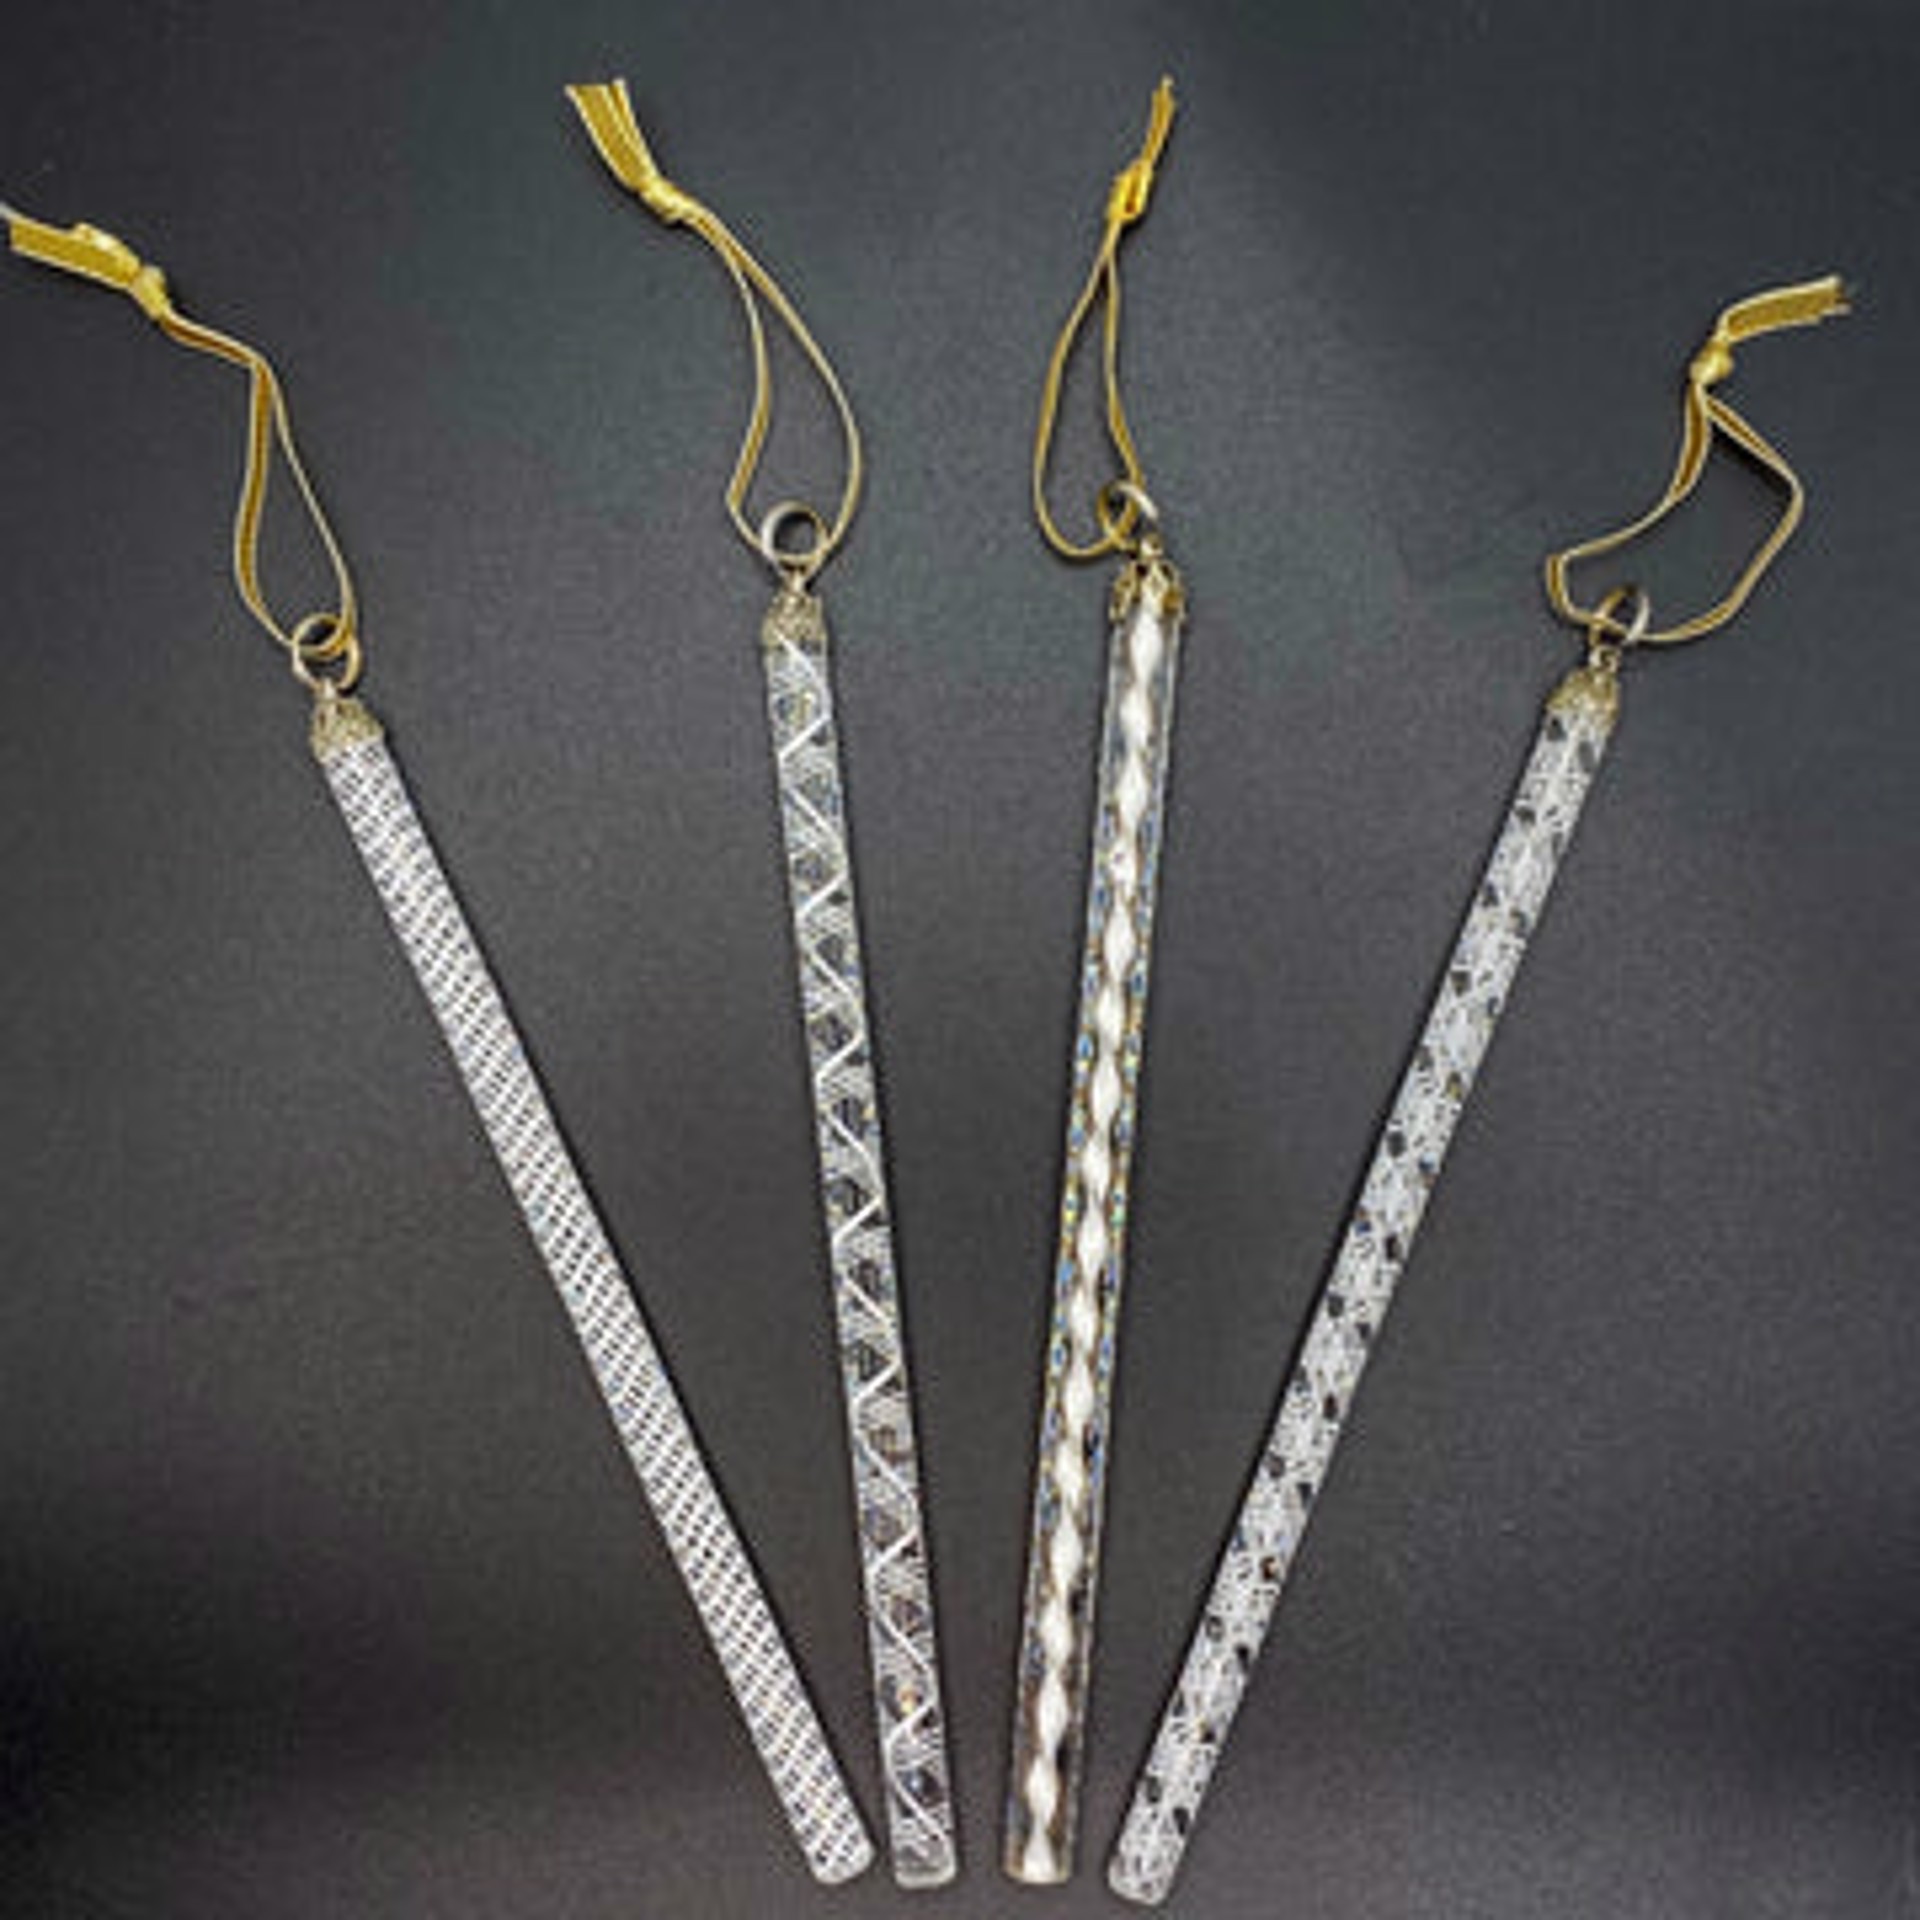 Art Glass Icicles -  White Filigree Mix  (boxed set of 4) 202994 by Virginia Wilson Toccalino